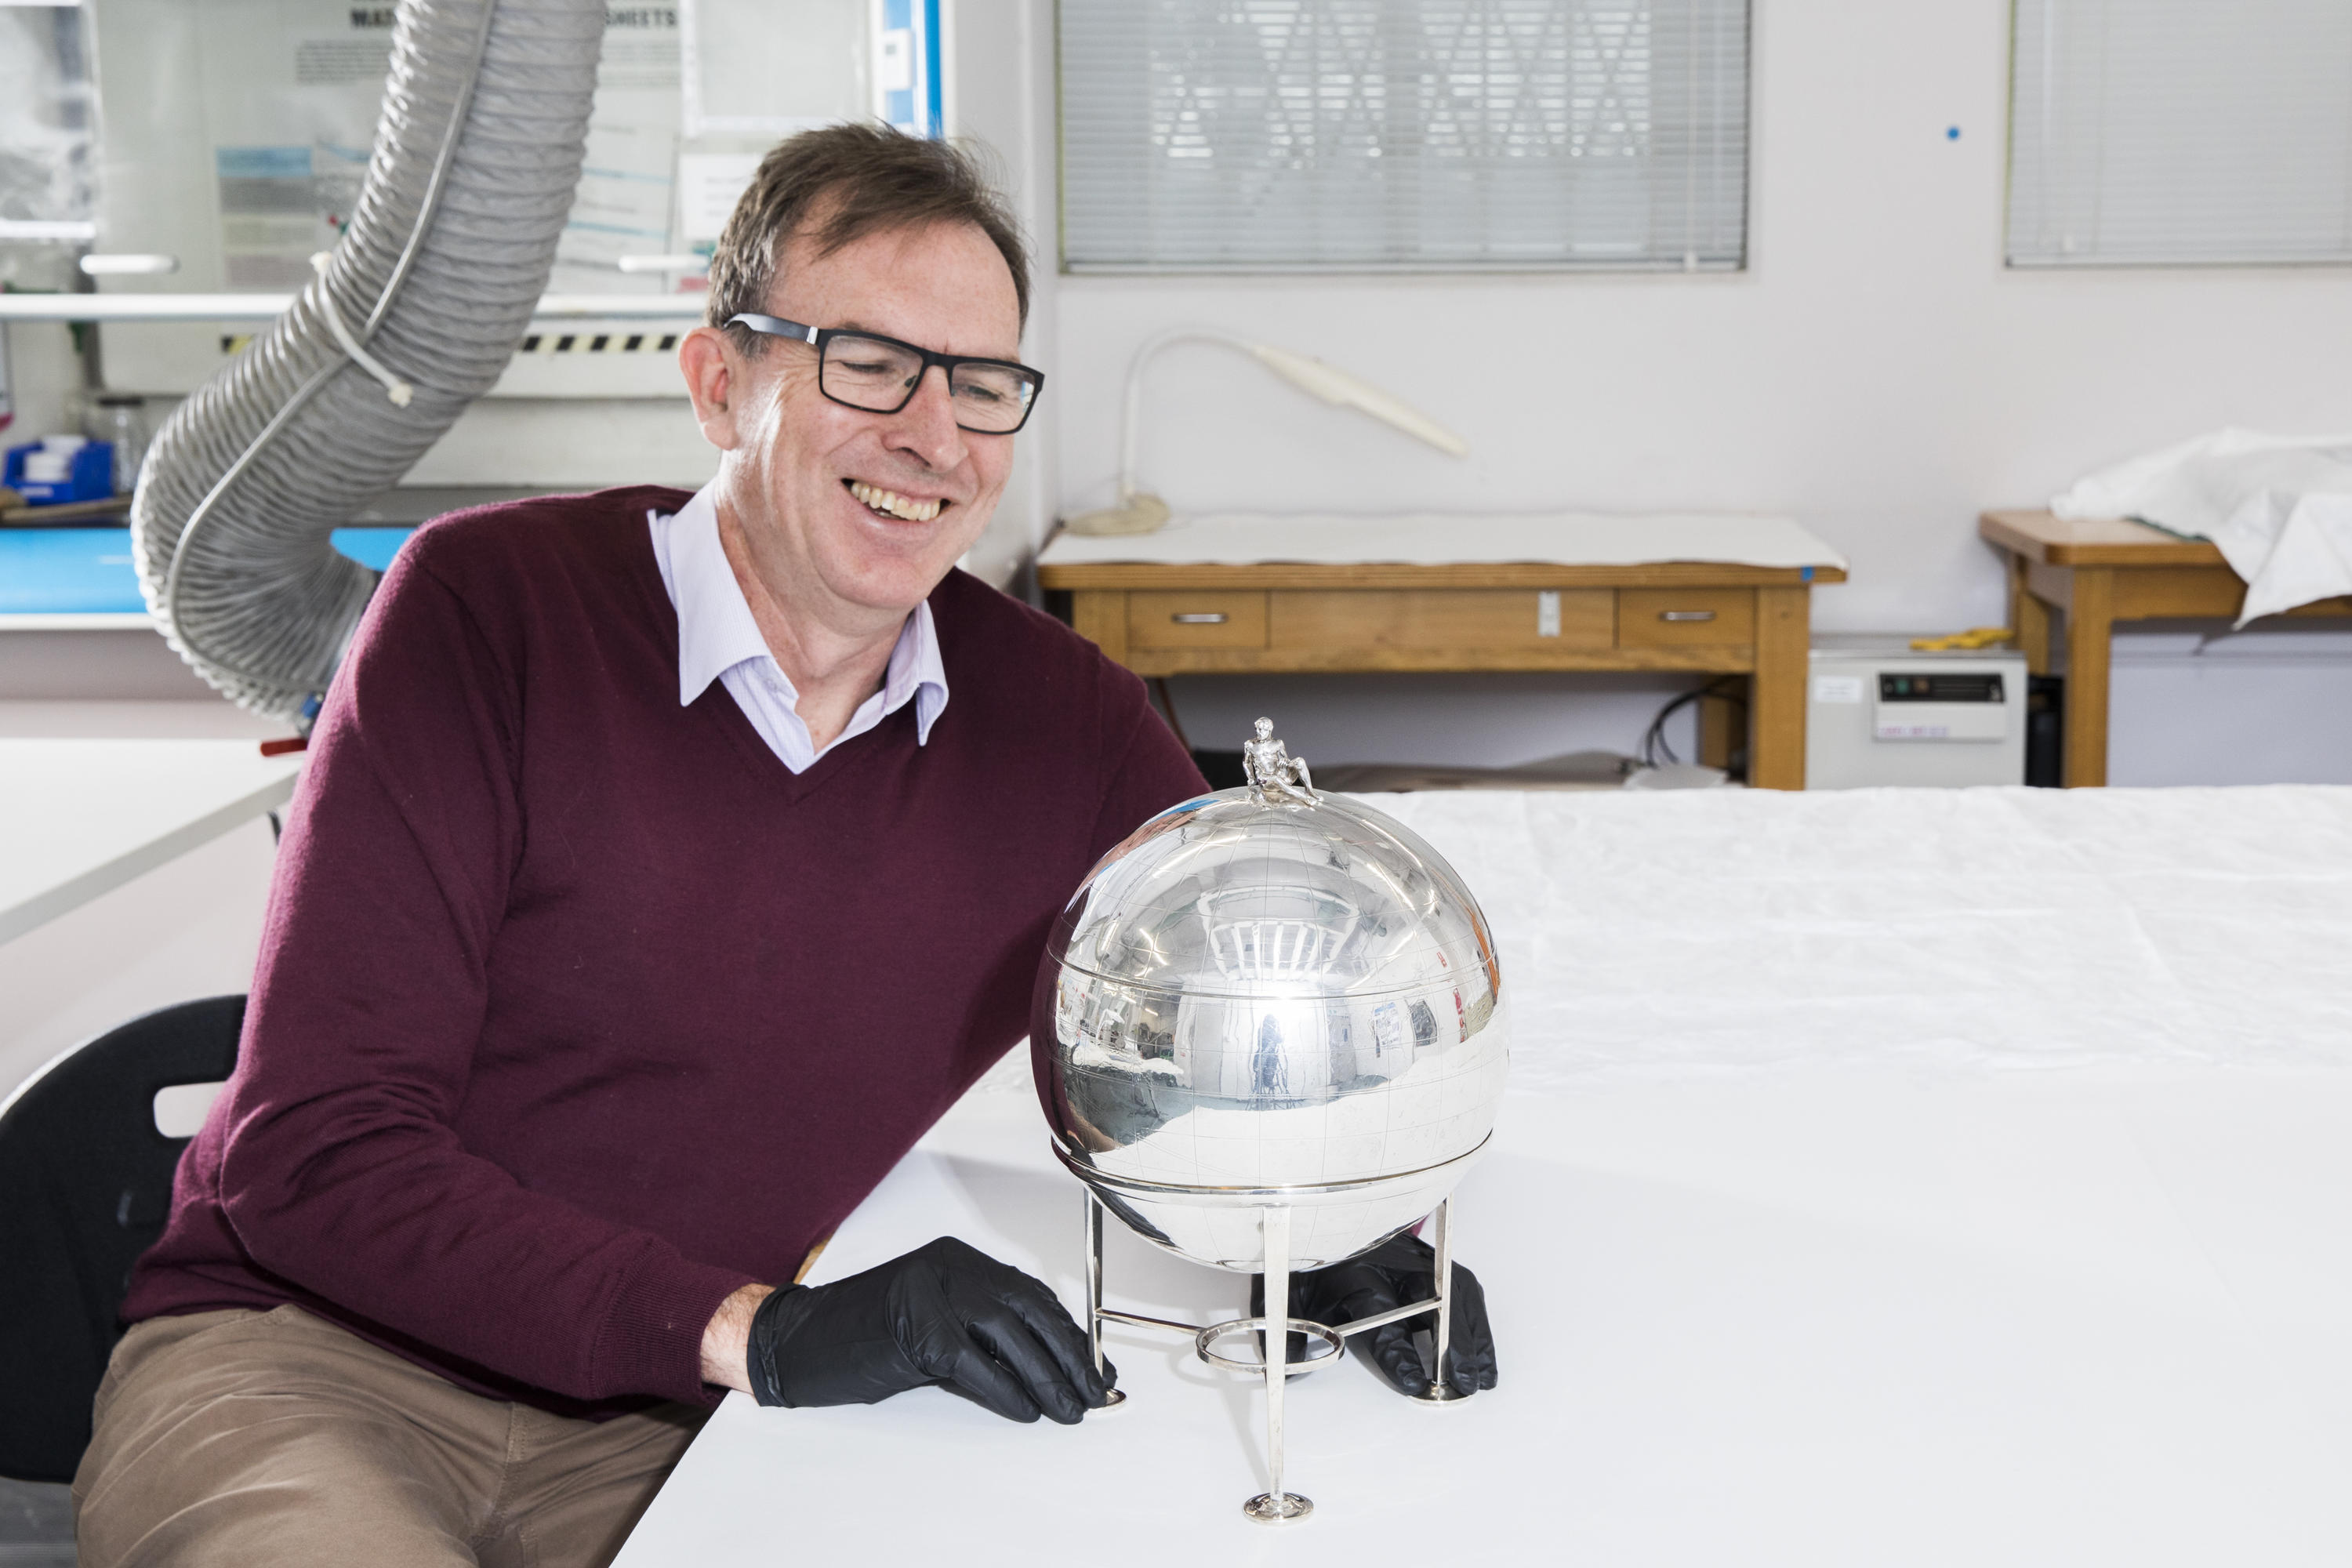 Richard Neville with the Globular punchbowl showing track of James Cook's first voyage on HMS Endeavour, probably commissioned by Joseph Banks